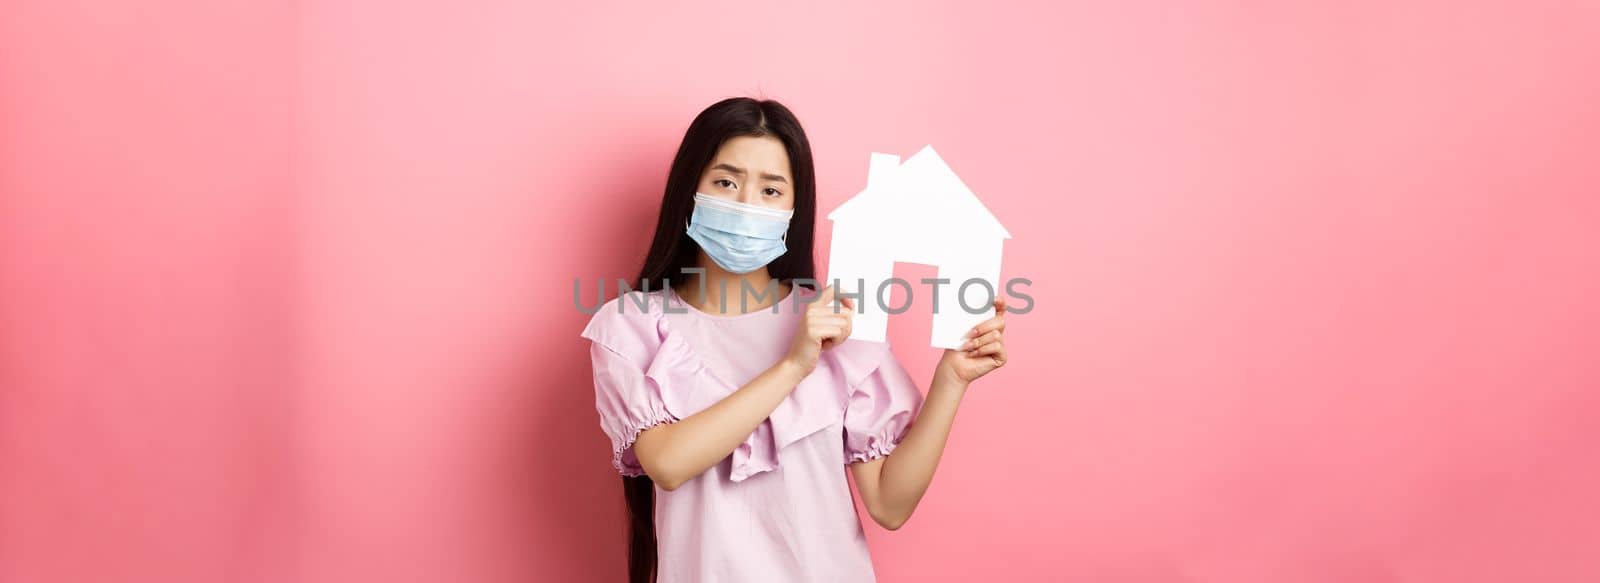 Real estate and pandemic concept. Gloomy girl showing paper house cutout, wearing medical mask and dress, standing against pink background.